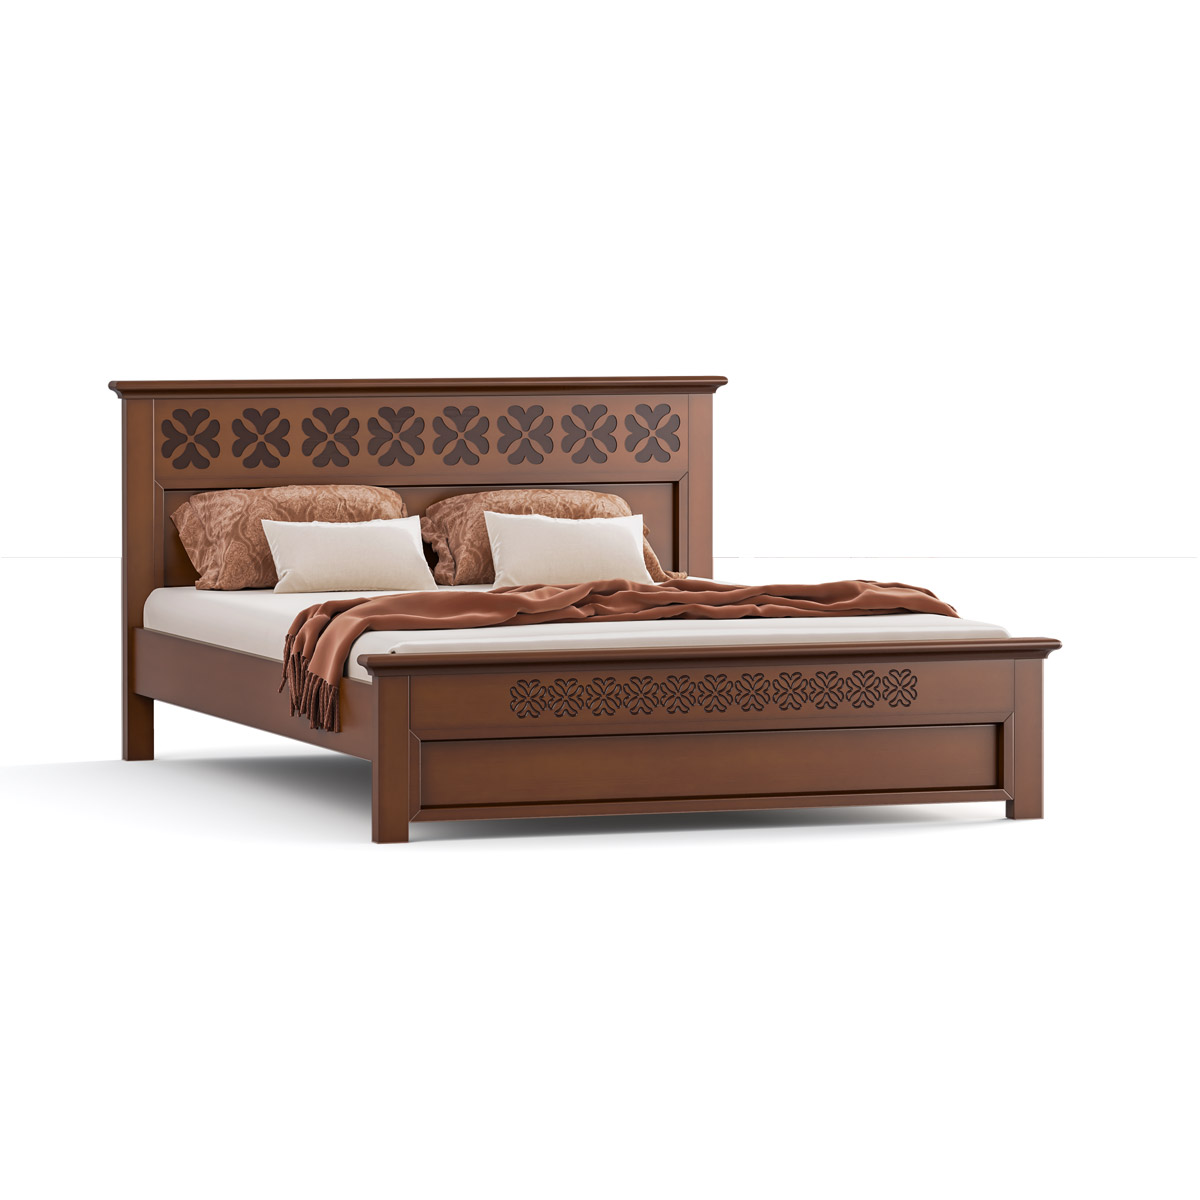 WOODEN BED- FLORIDA BDH-371-3-1-20 (Double Bed) 